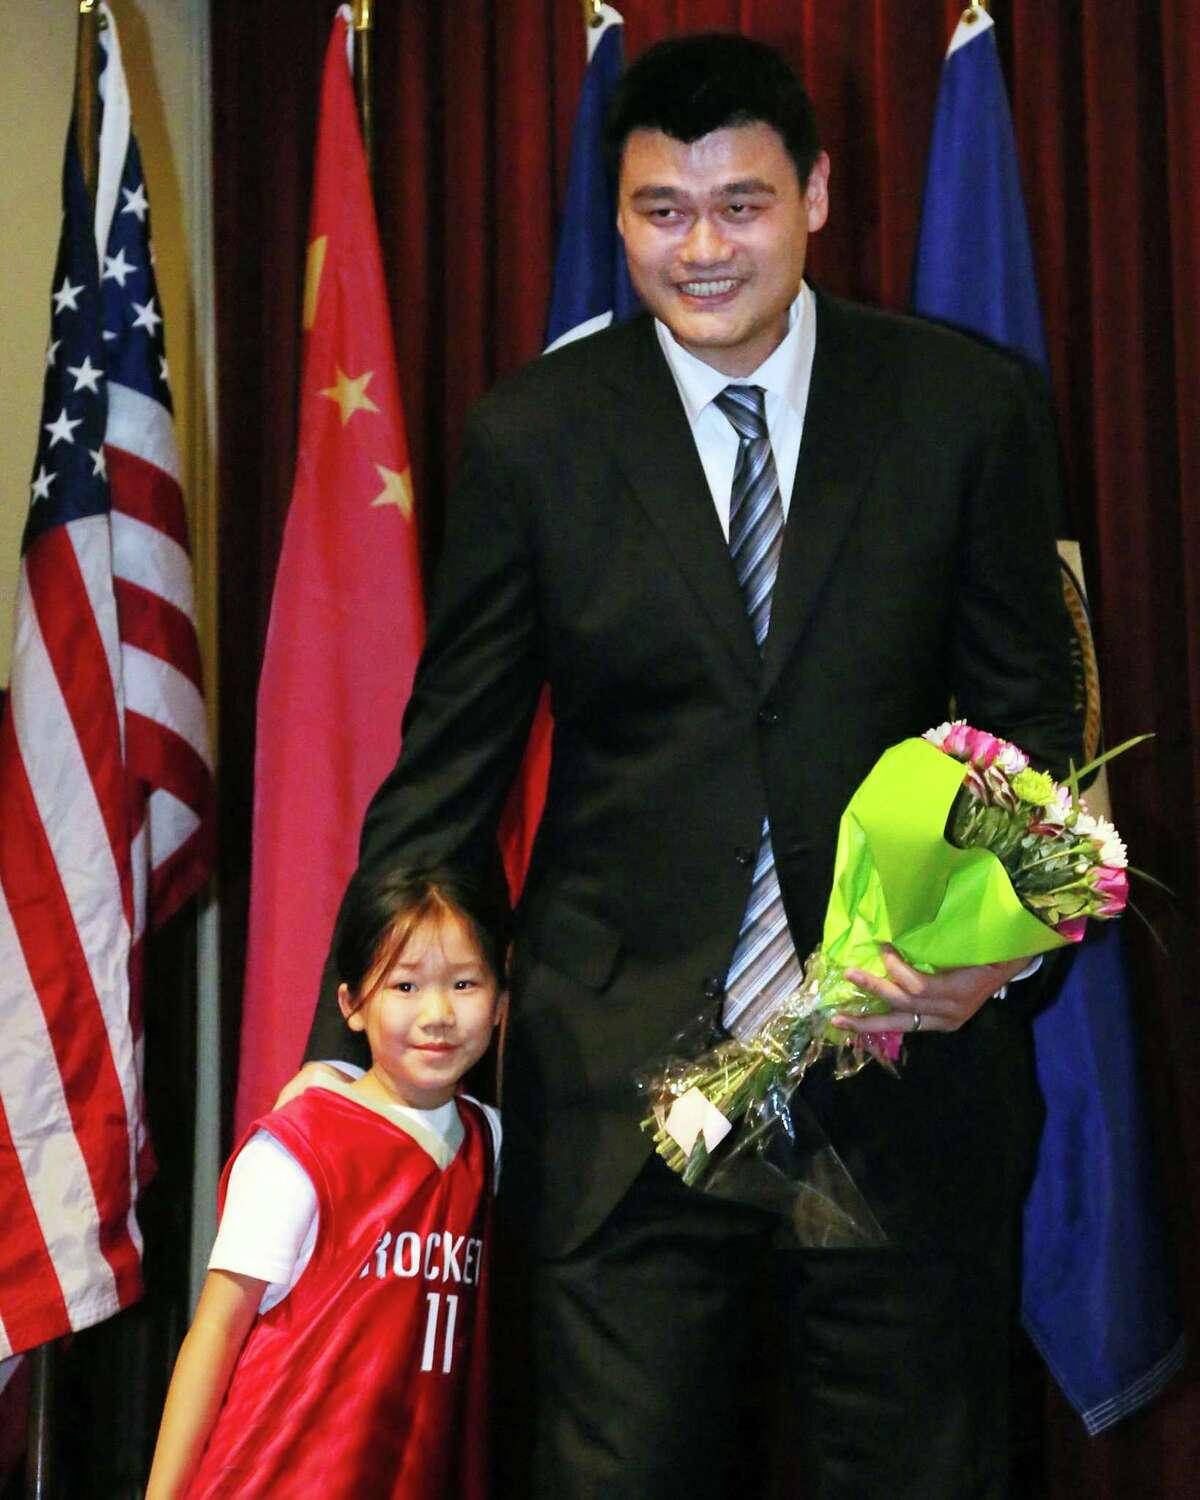 Melody Huang, daughter of Yao Ming Fan Club President Peter Huang, pictured with Yao Ming at the Yao Ming Day Celebration at City Hall on Feb. 15, 2013.